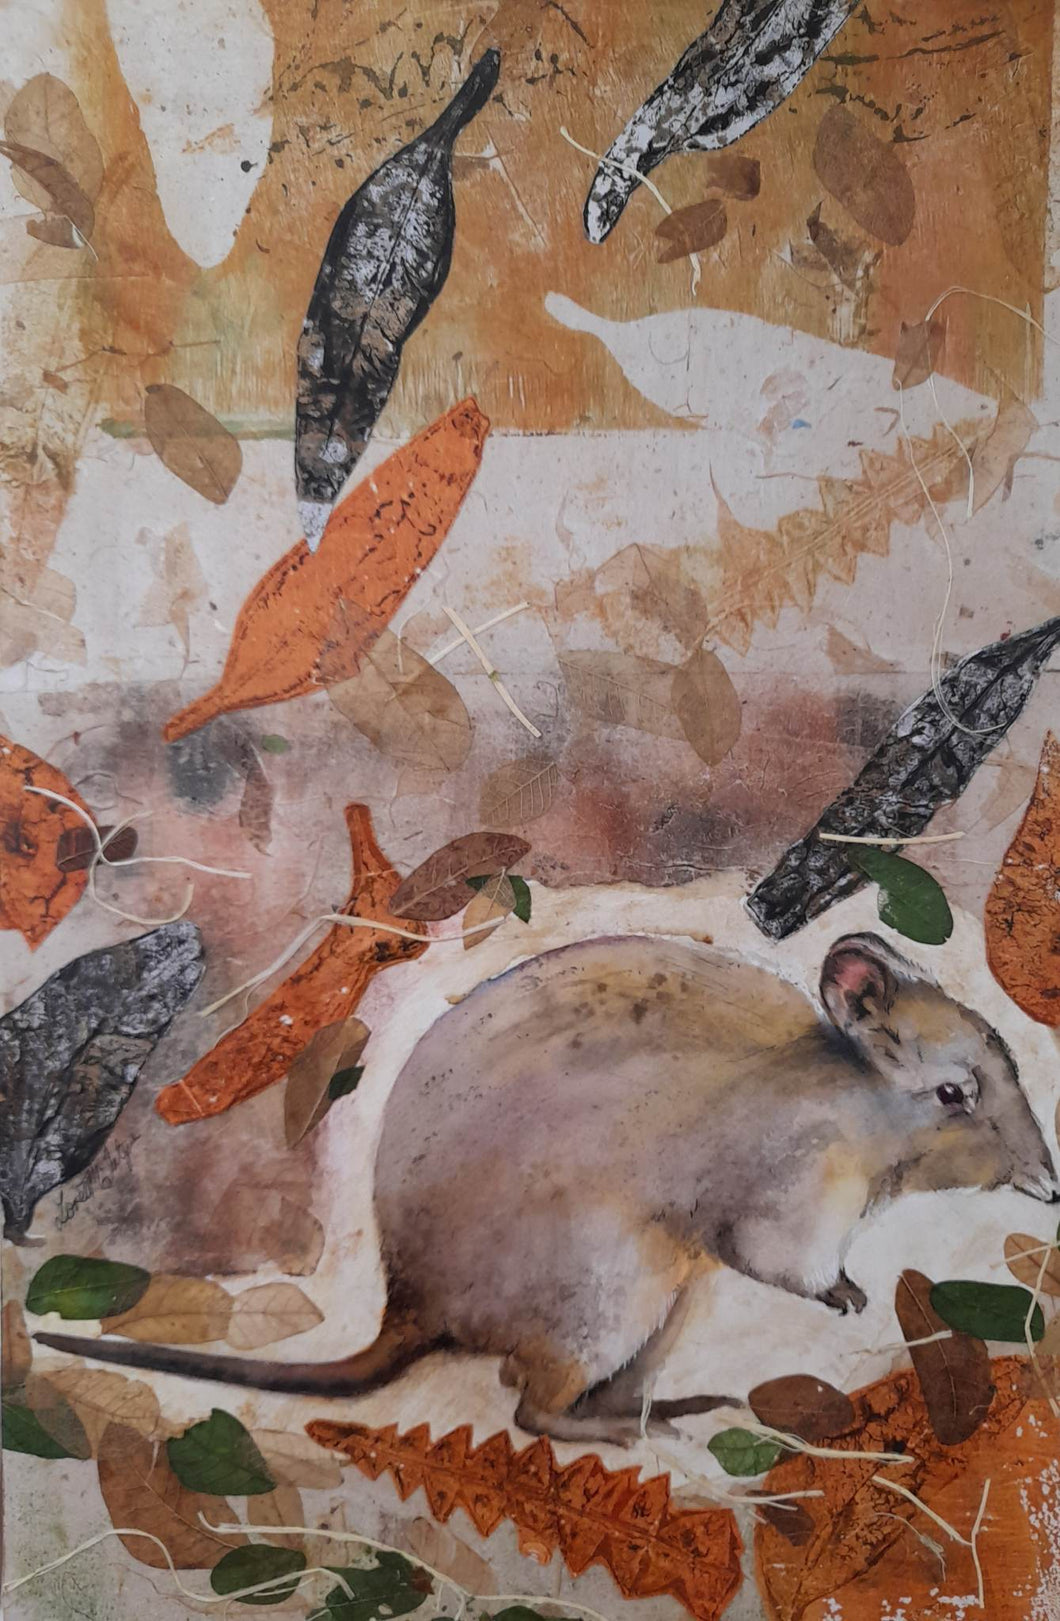 Potoroo in an abstract woodland scene.